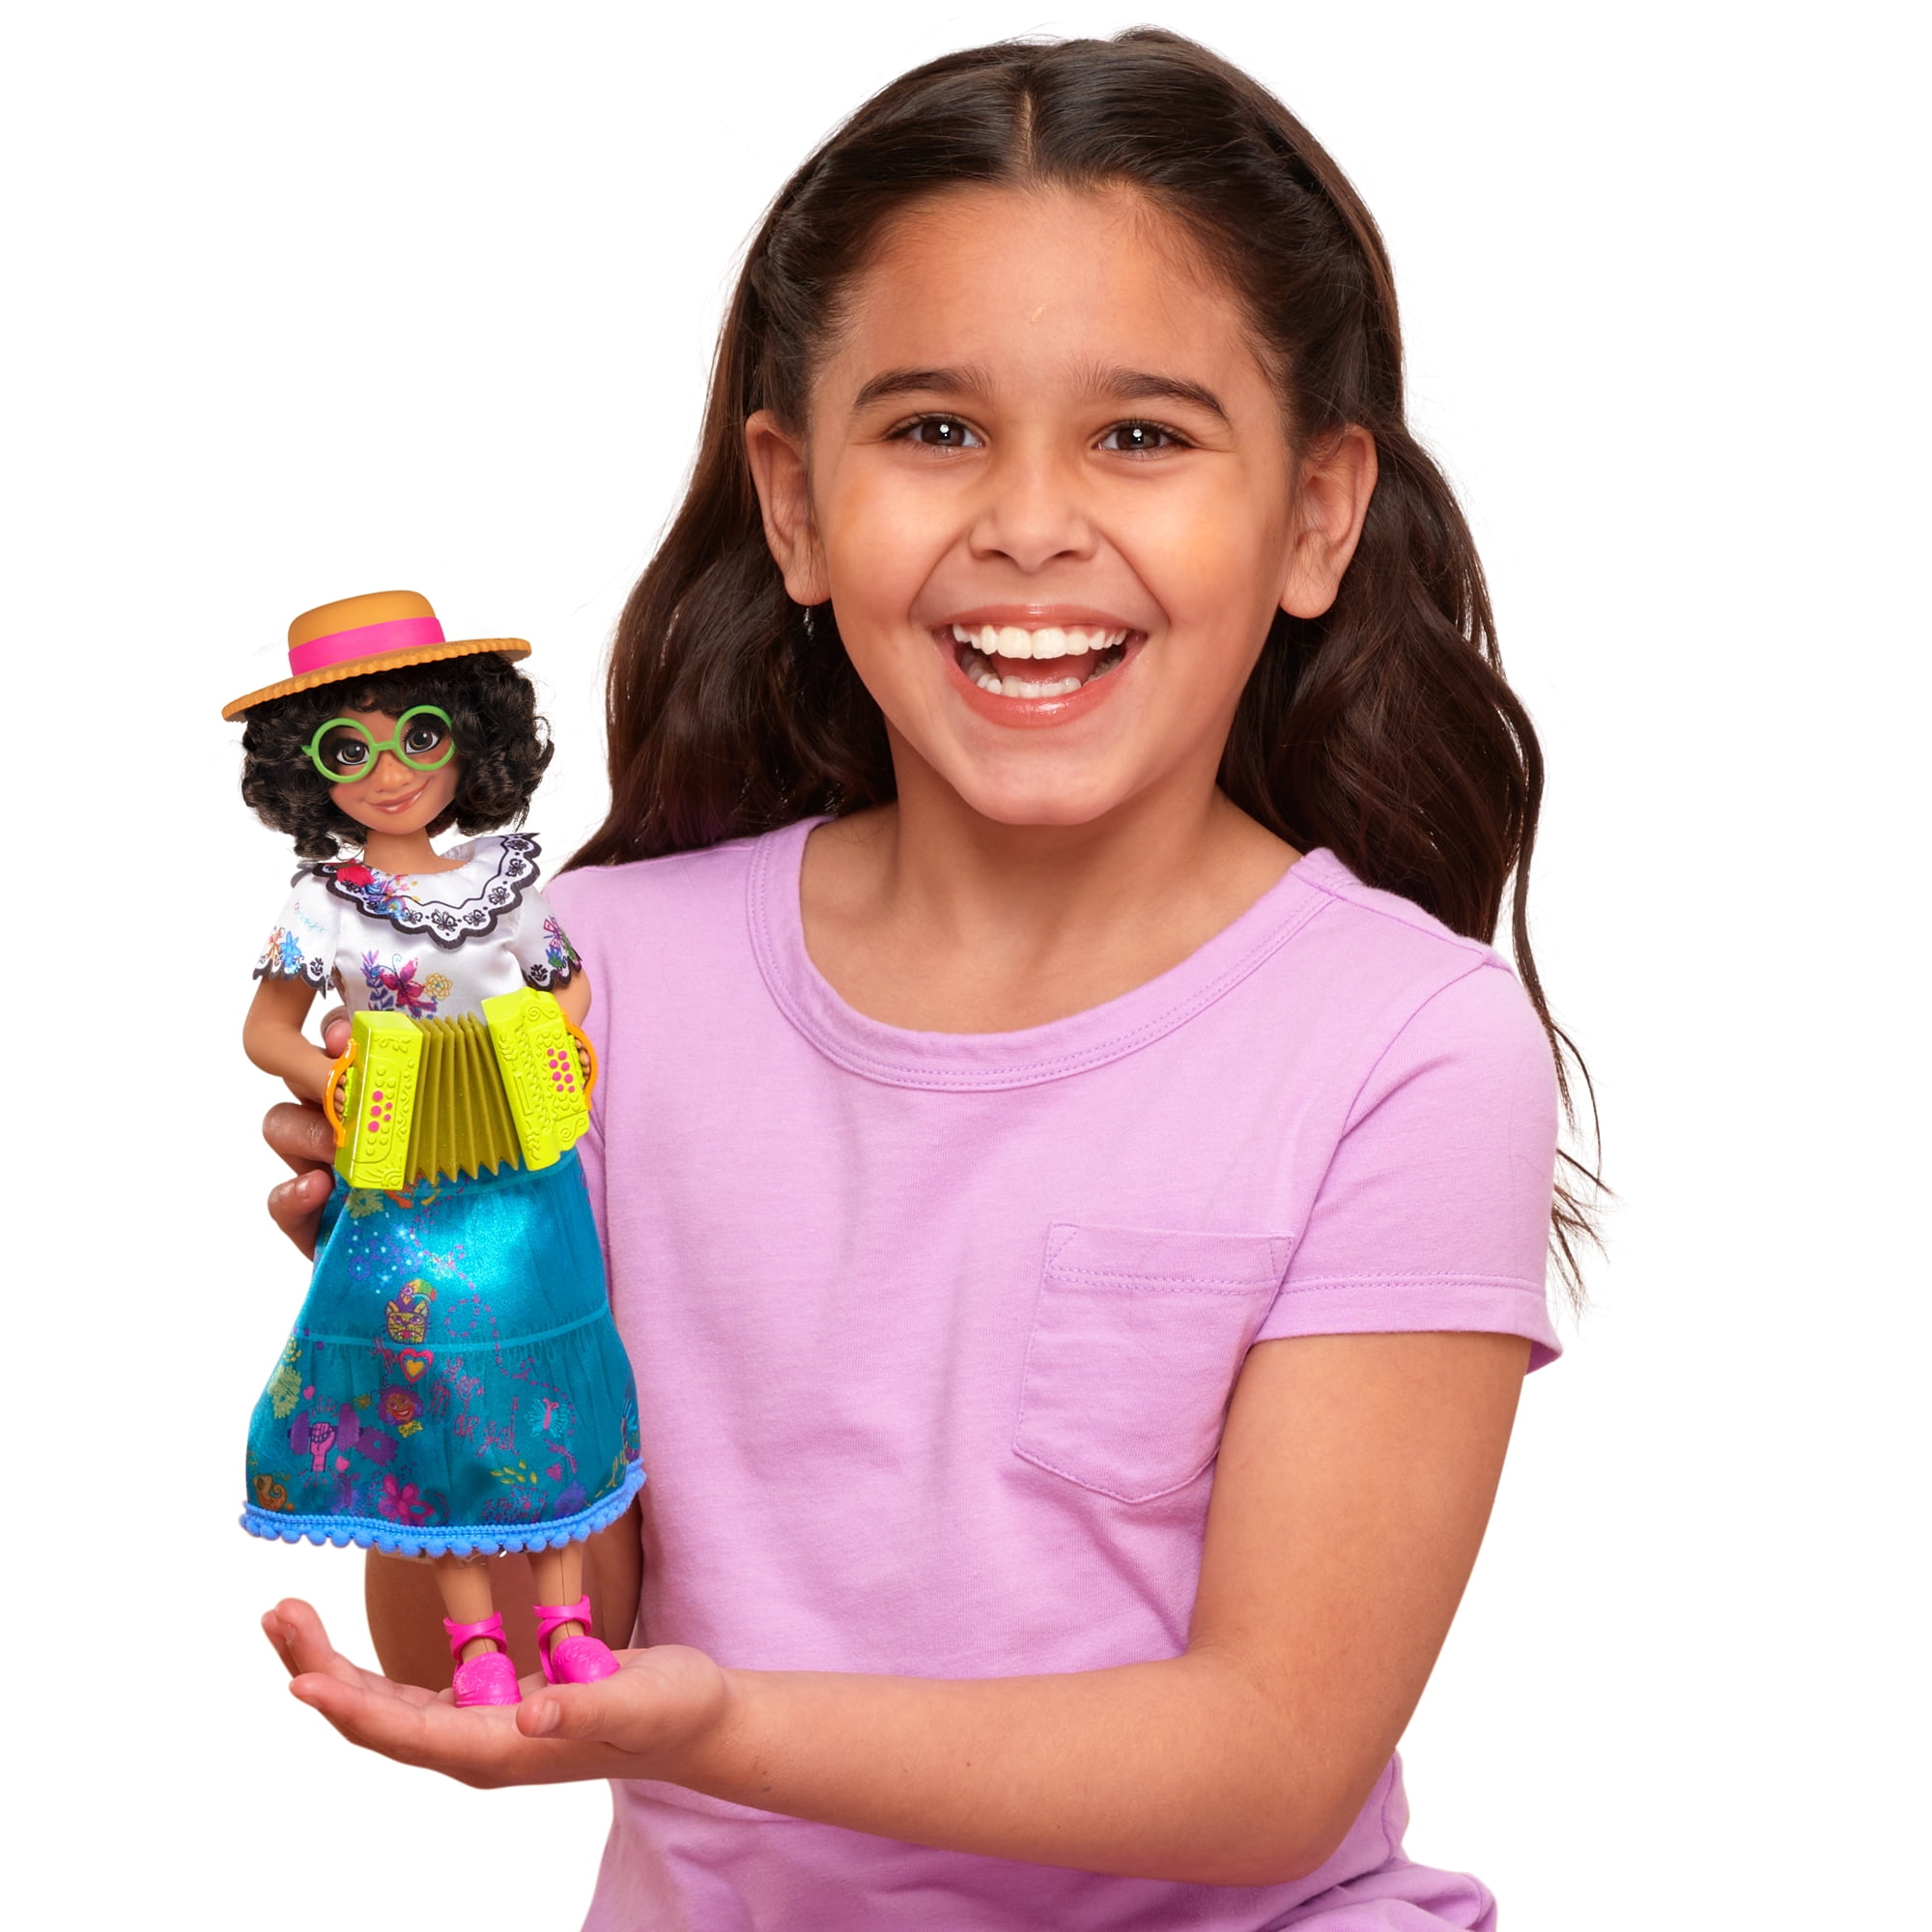 Disney Encanto Mirabel Doll Sing & Play, Sings Music and Plays The Accordion